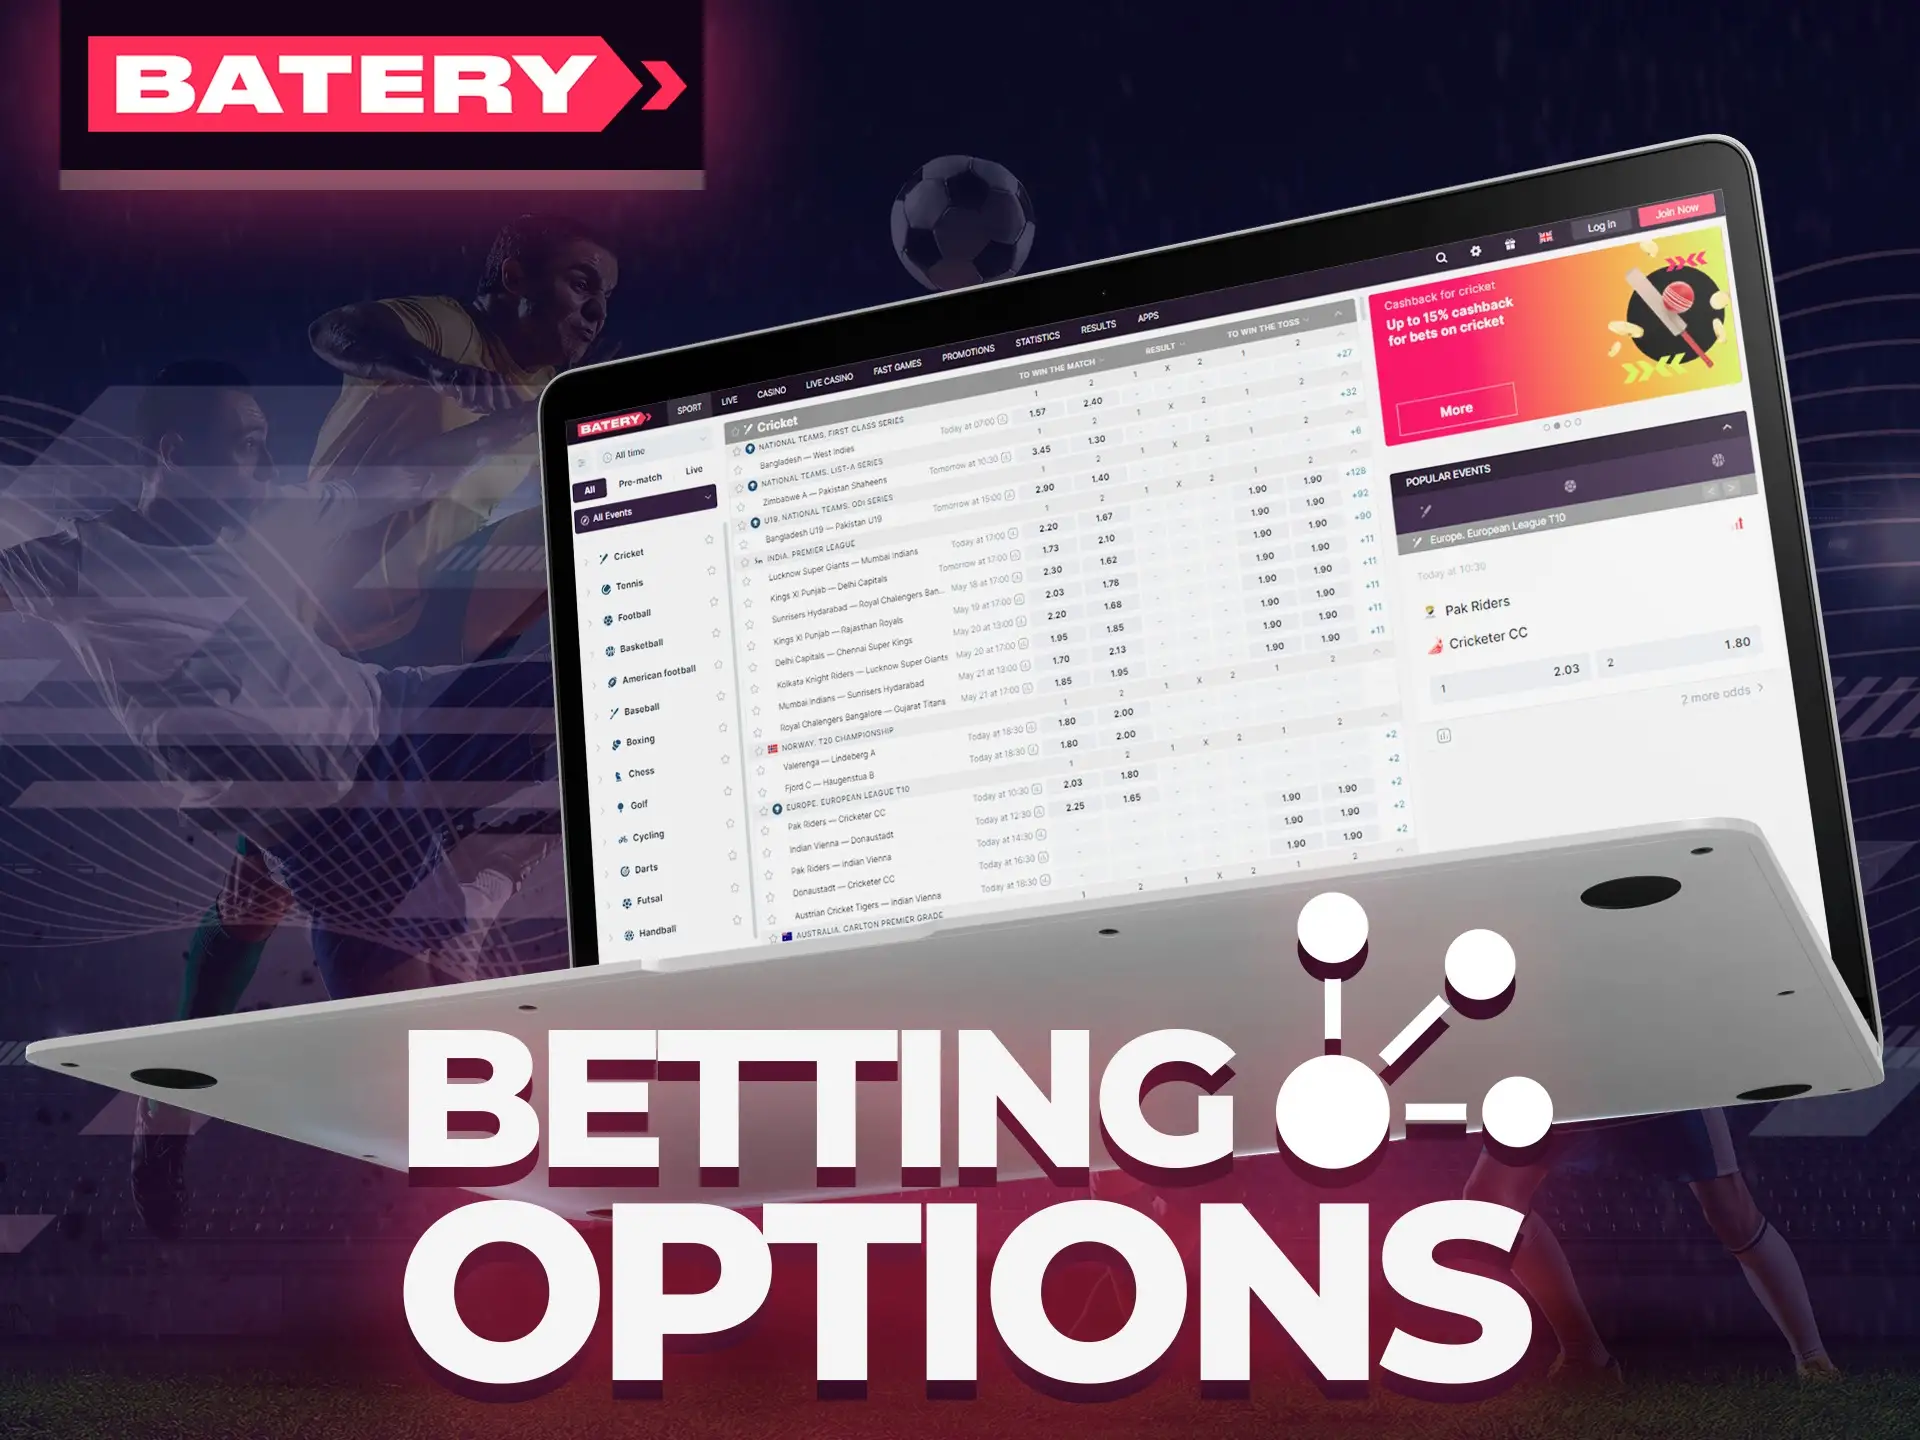 Make different bets by using additional features at Batery.